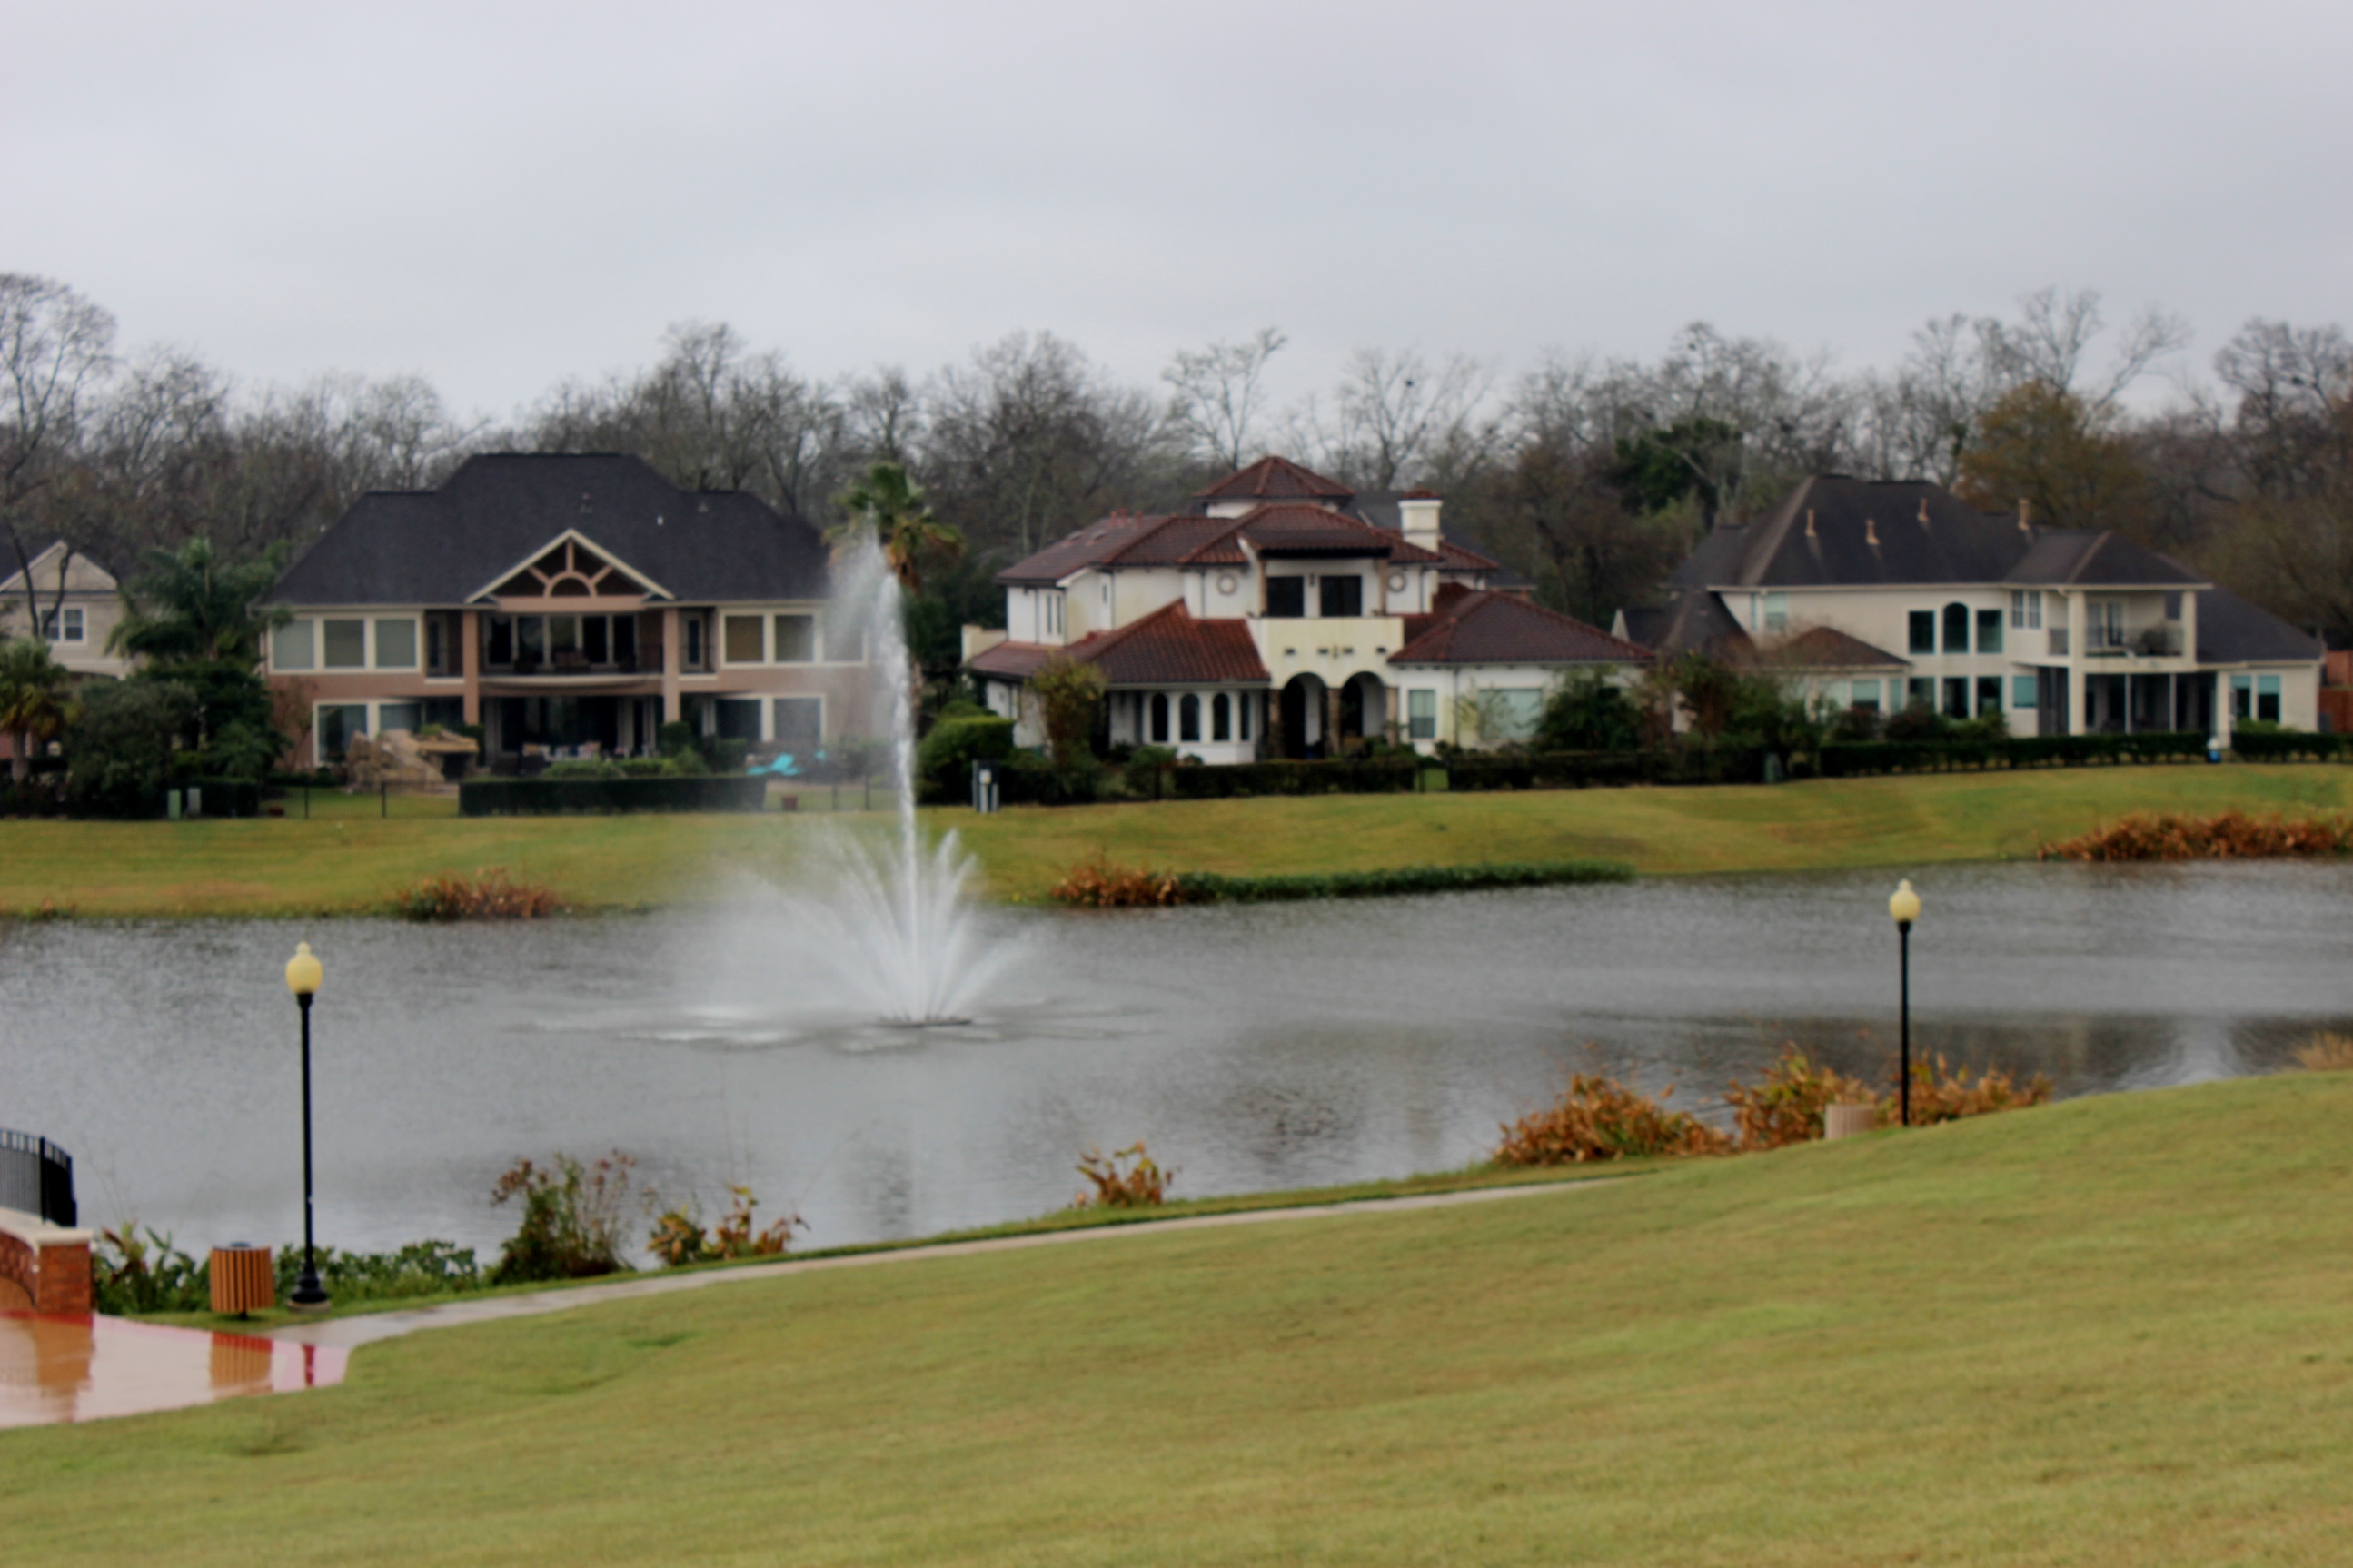 Sienna Plantation covers 16 square miles and has a population of over 20,000